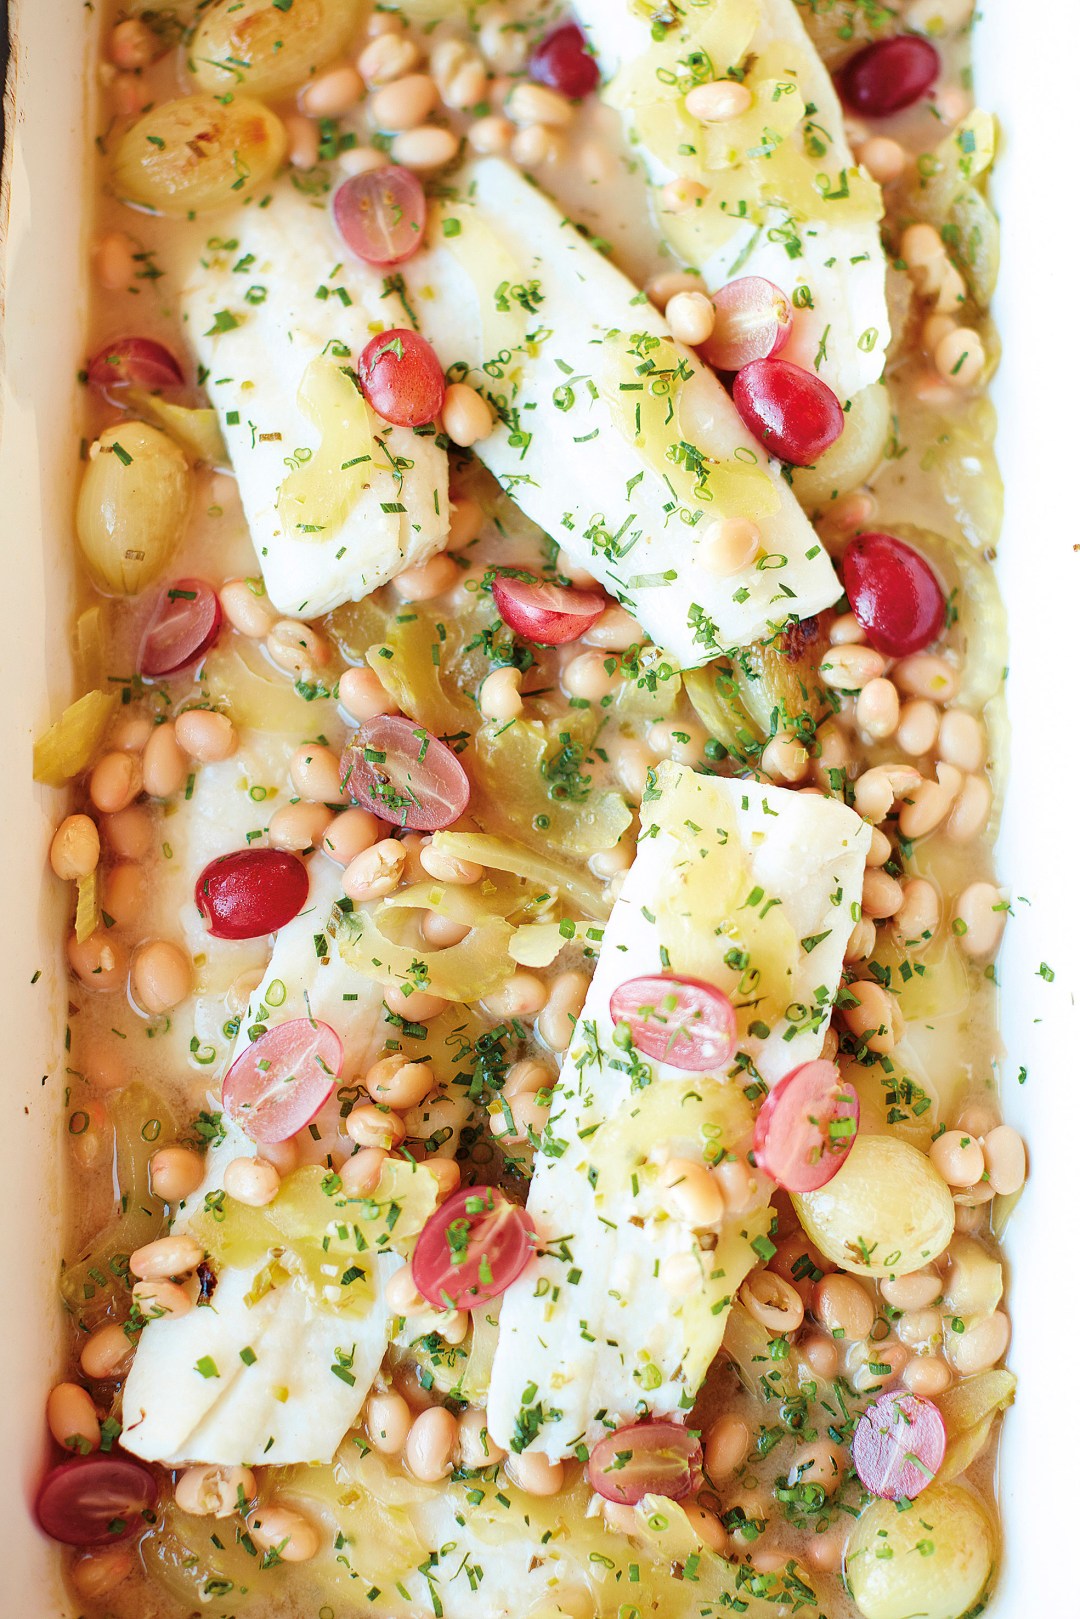 Hot marinated lemon sole with pickled onions and grapes